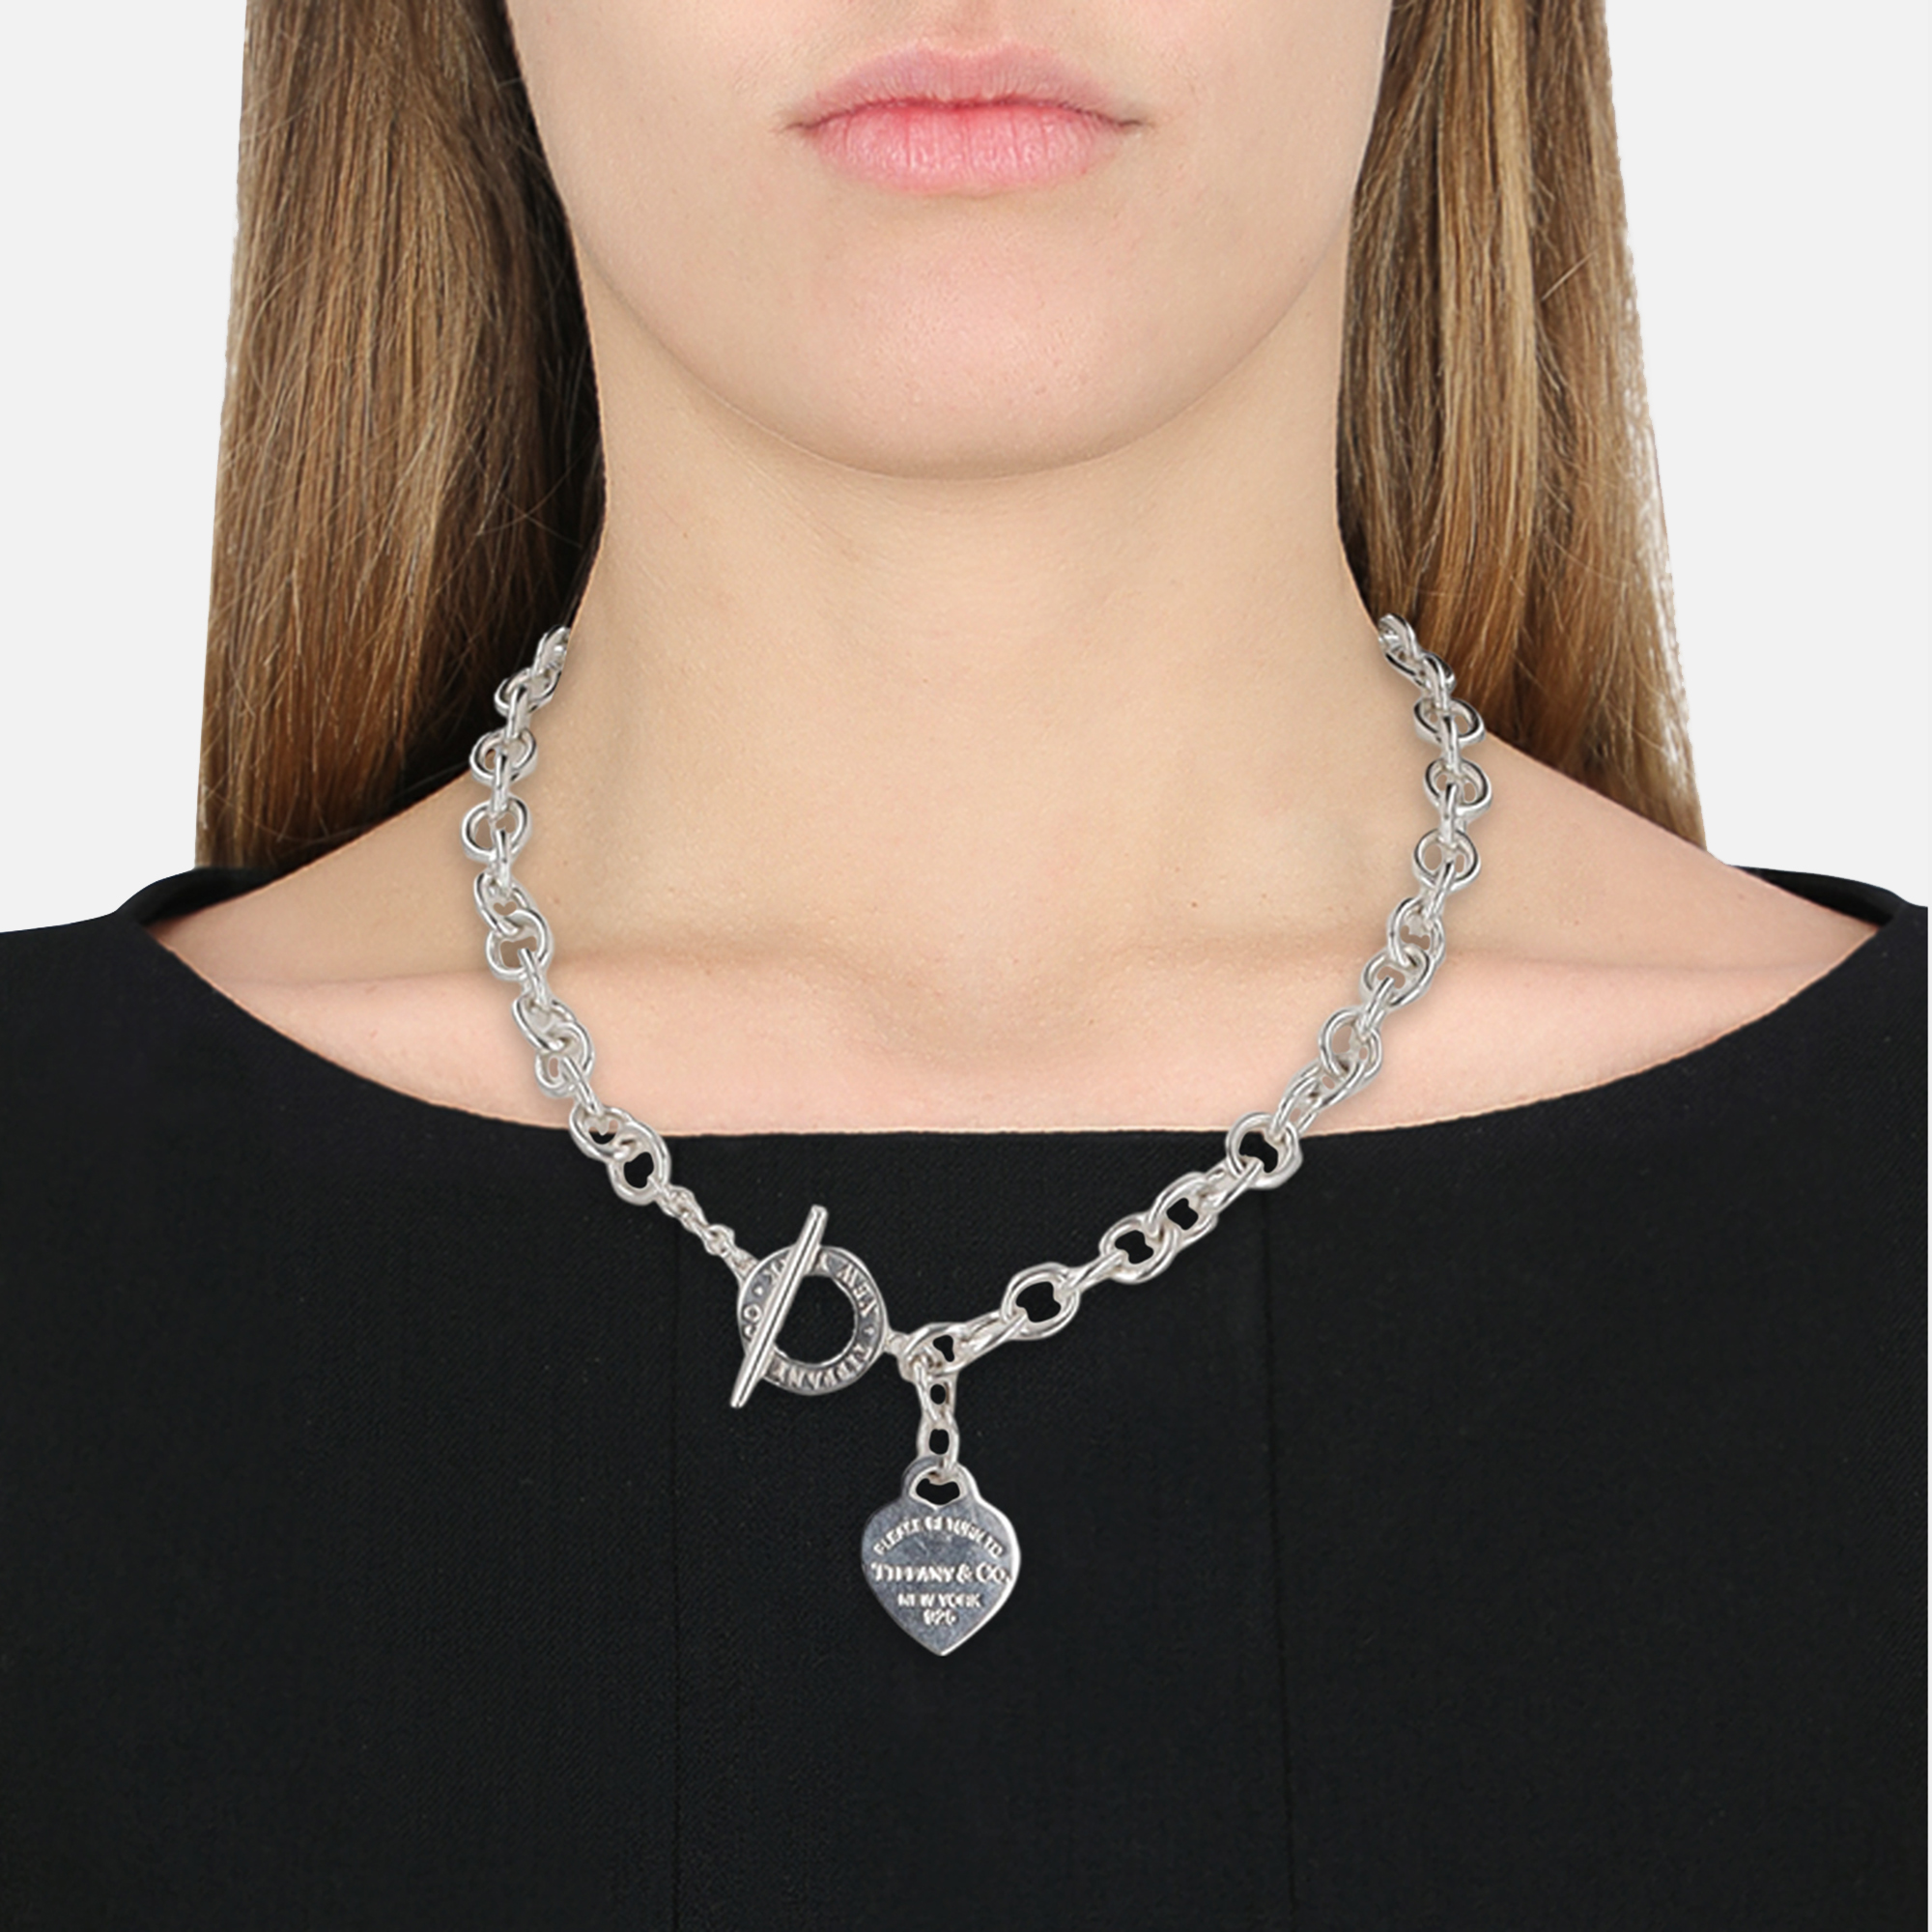 Tiffany & Co.  Women's Silver Charm Necklace - Silver - One Size